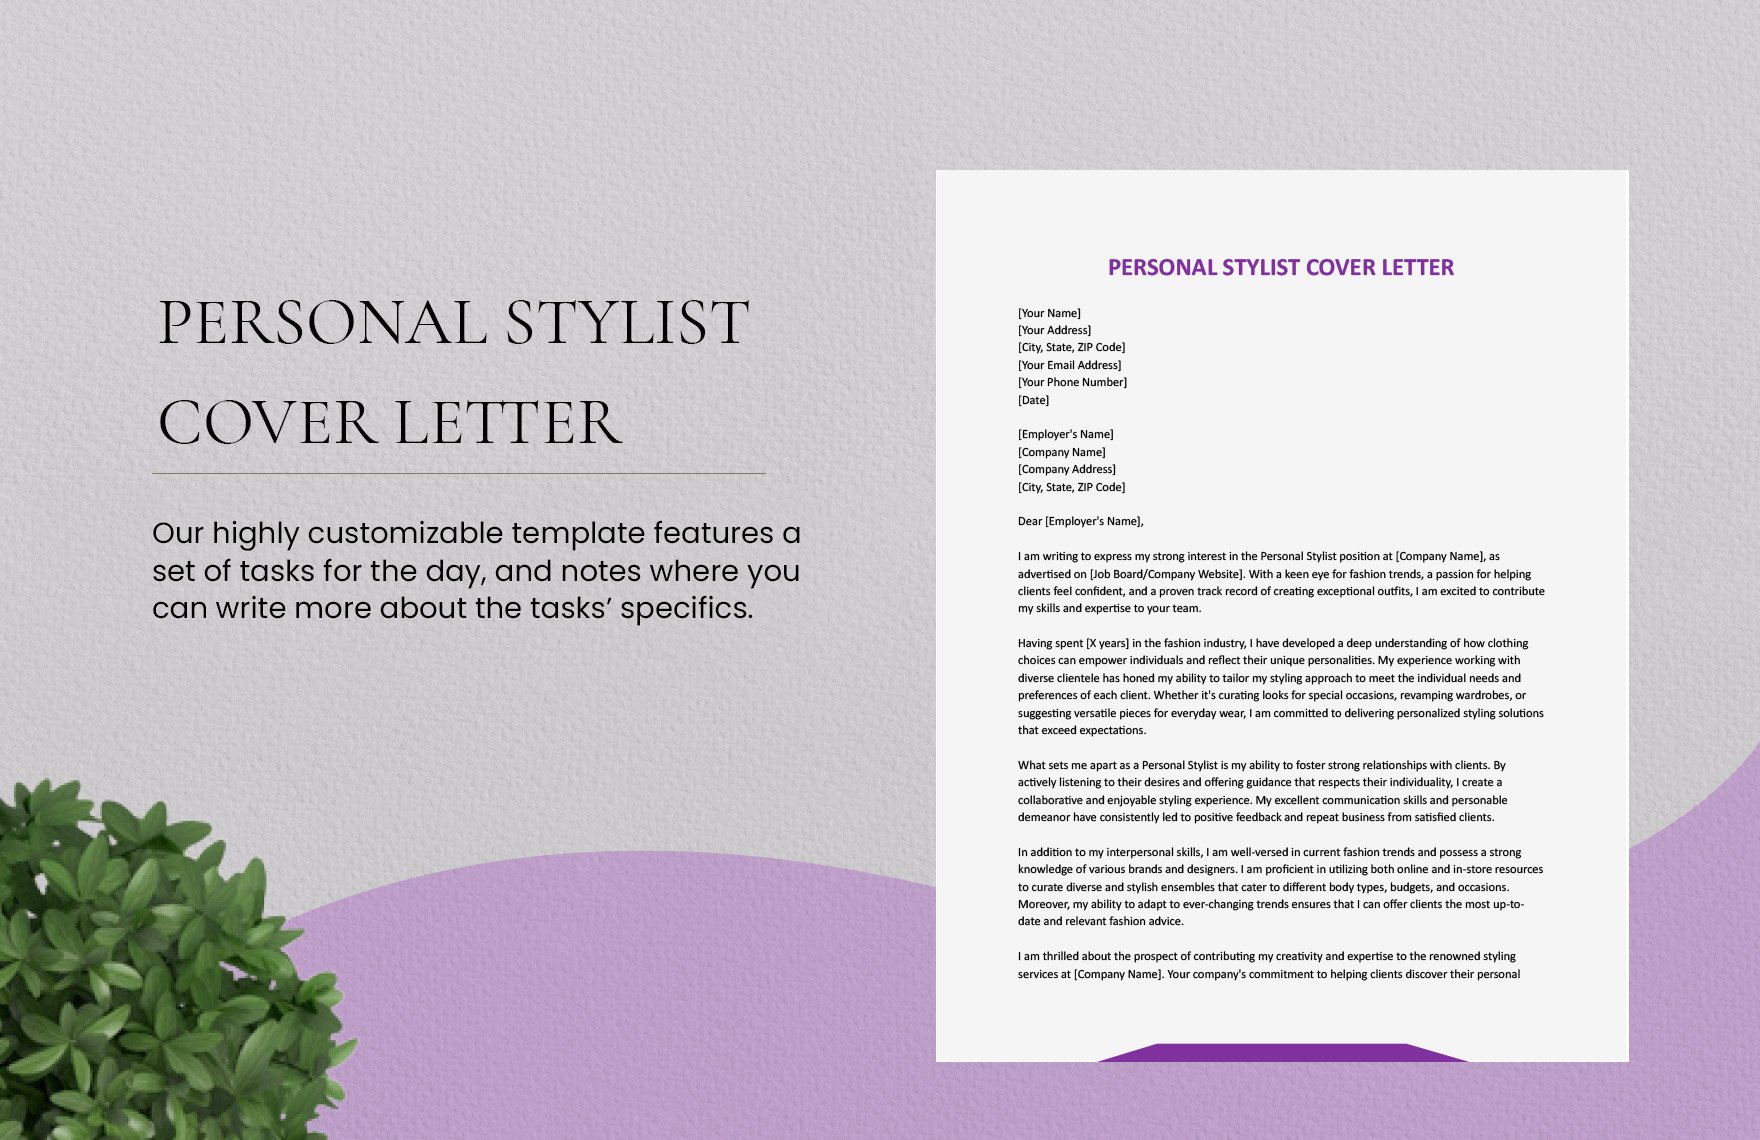 Personal Stylist Cover Letter in Word, Google Docs